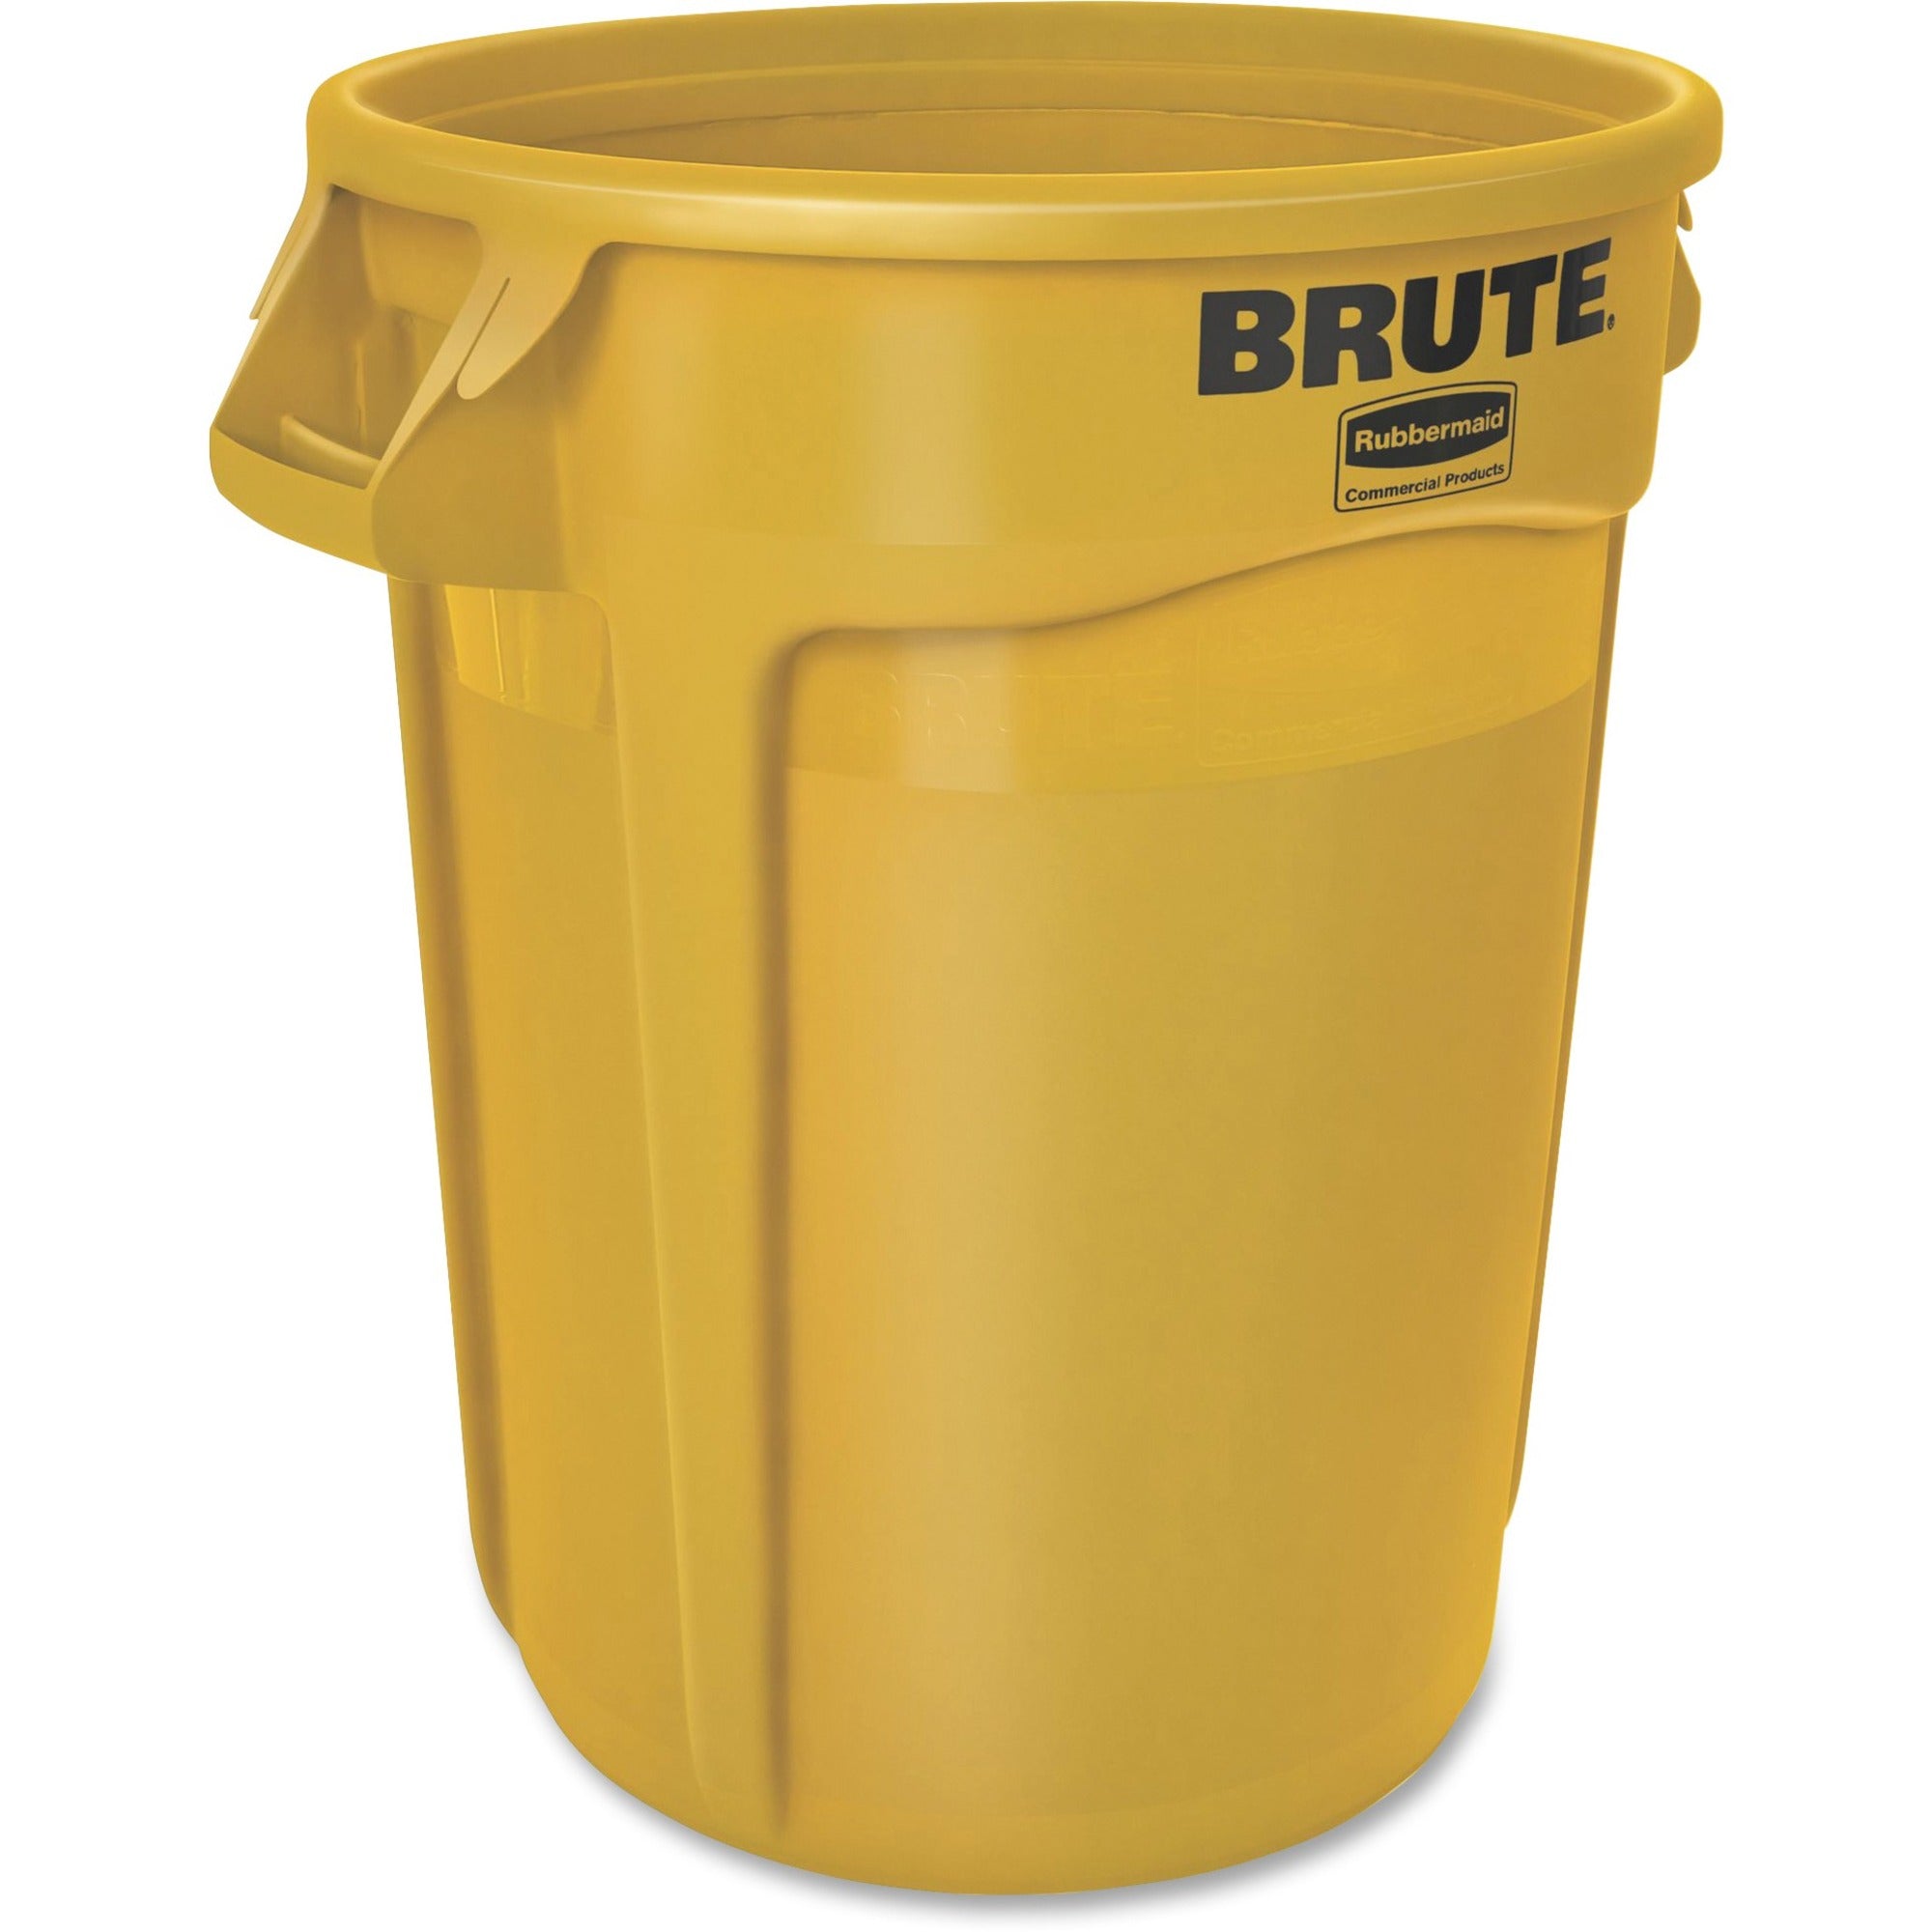 rubbermaid-commercial-brute-32-gallon-vented-containers-32-gal-capacity-round-reinforced-heavy-duty-handle-tear-resistant-reinforced-273-height-x-219-diameter-plastic-yellow-6-carton_rcp263200yelct - 1